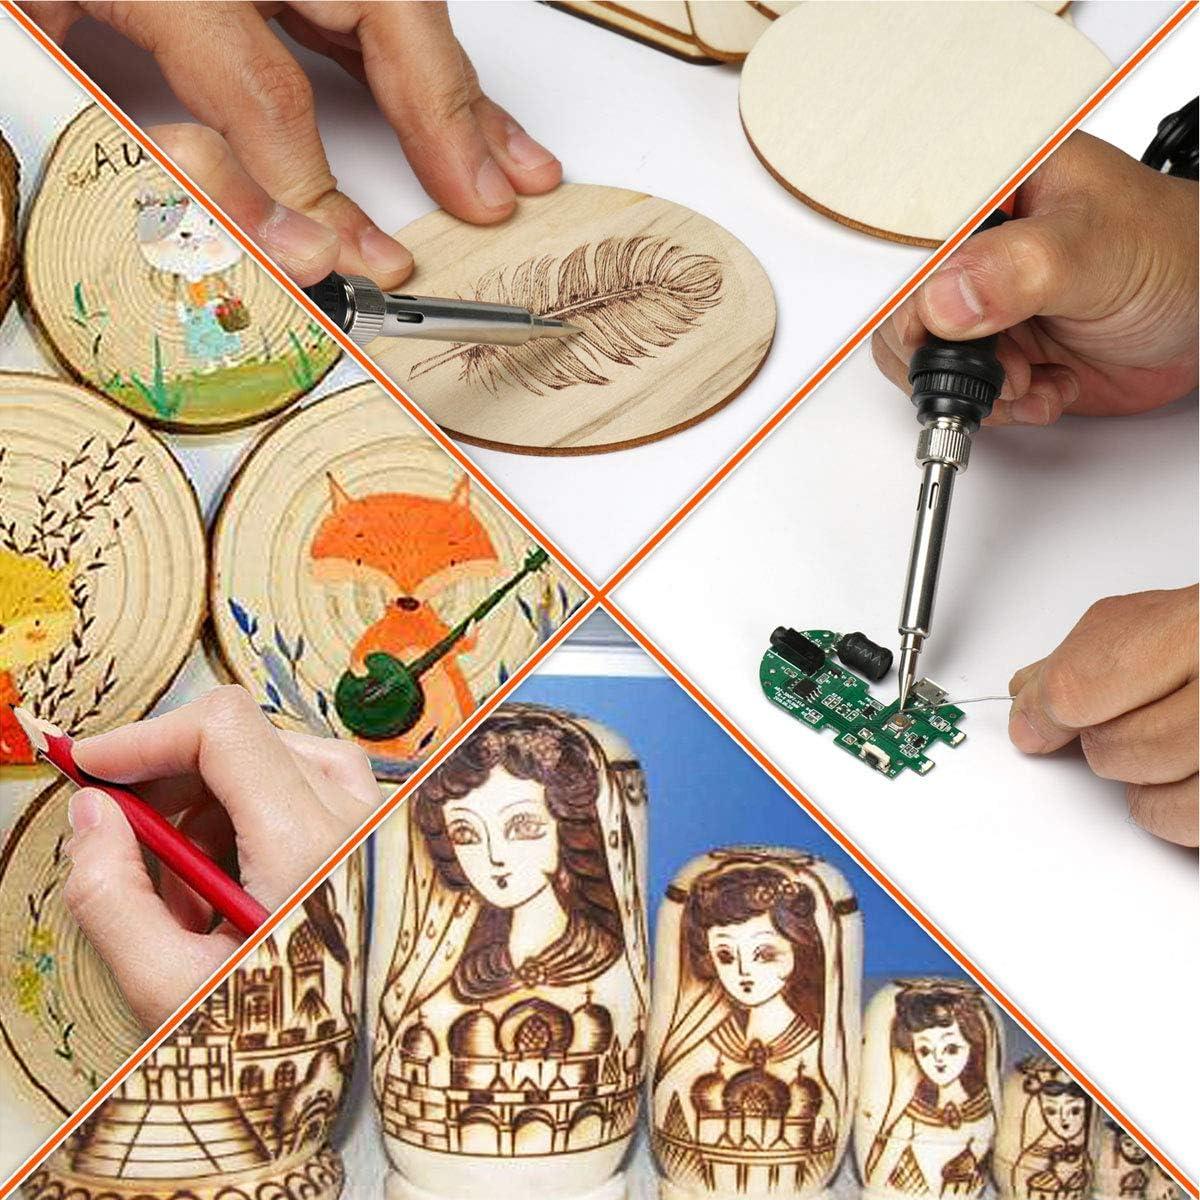 28-Piece Professional Wood Burning Pyrography Kit with Stencils